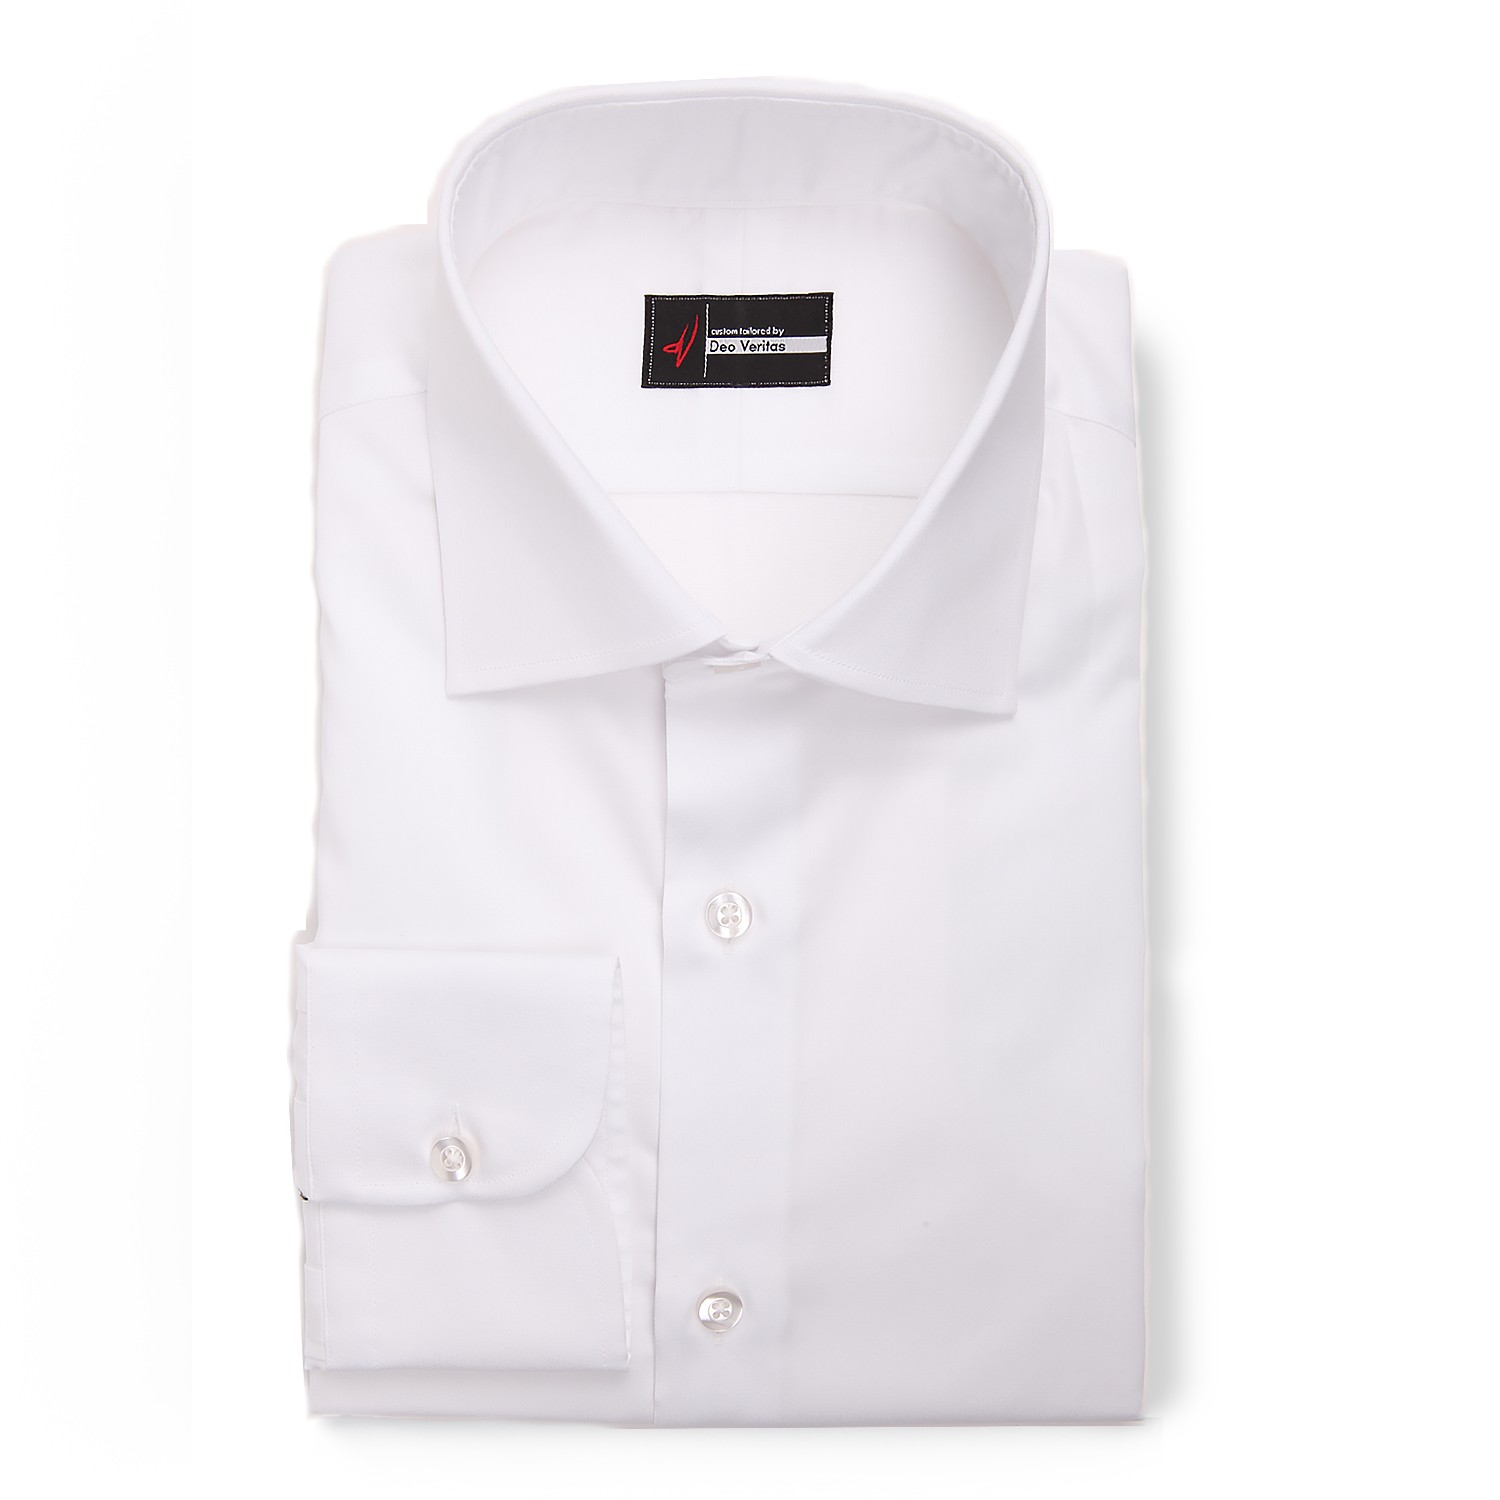 The Mens White Dress Shirt — A Definitive Buying Guide on Our Favorites